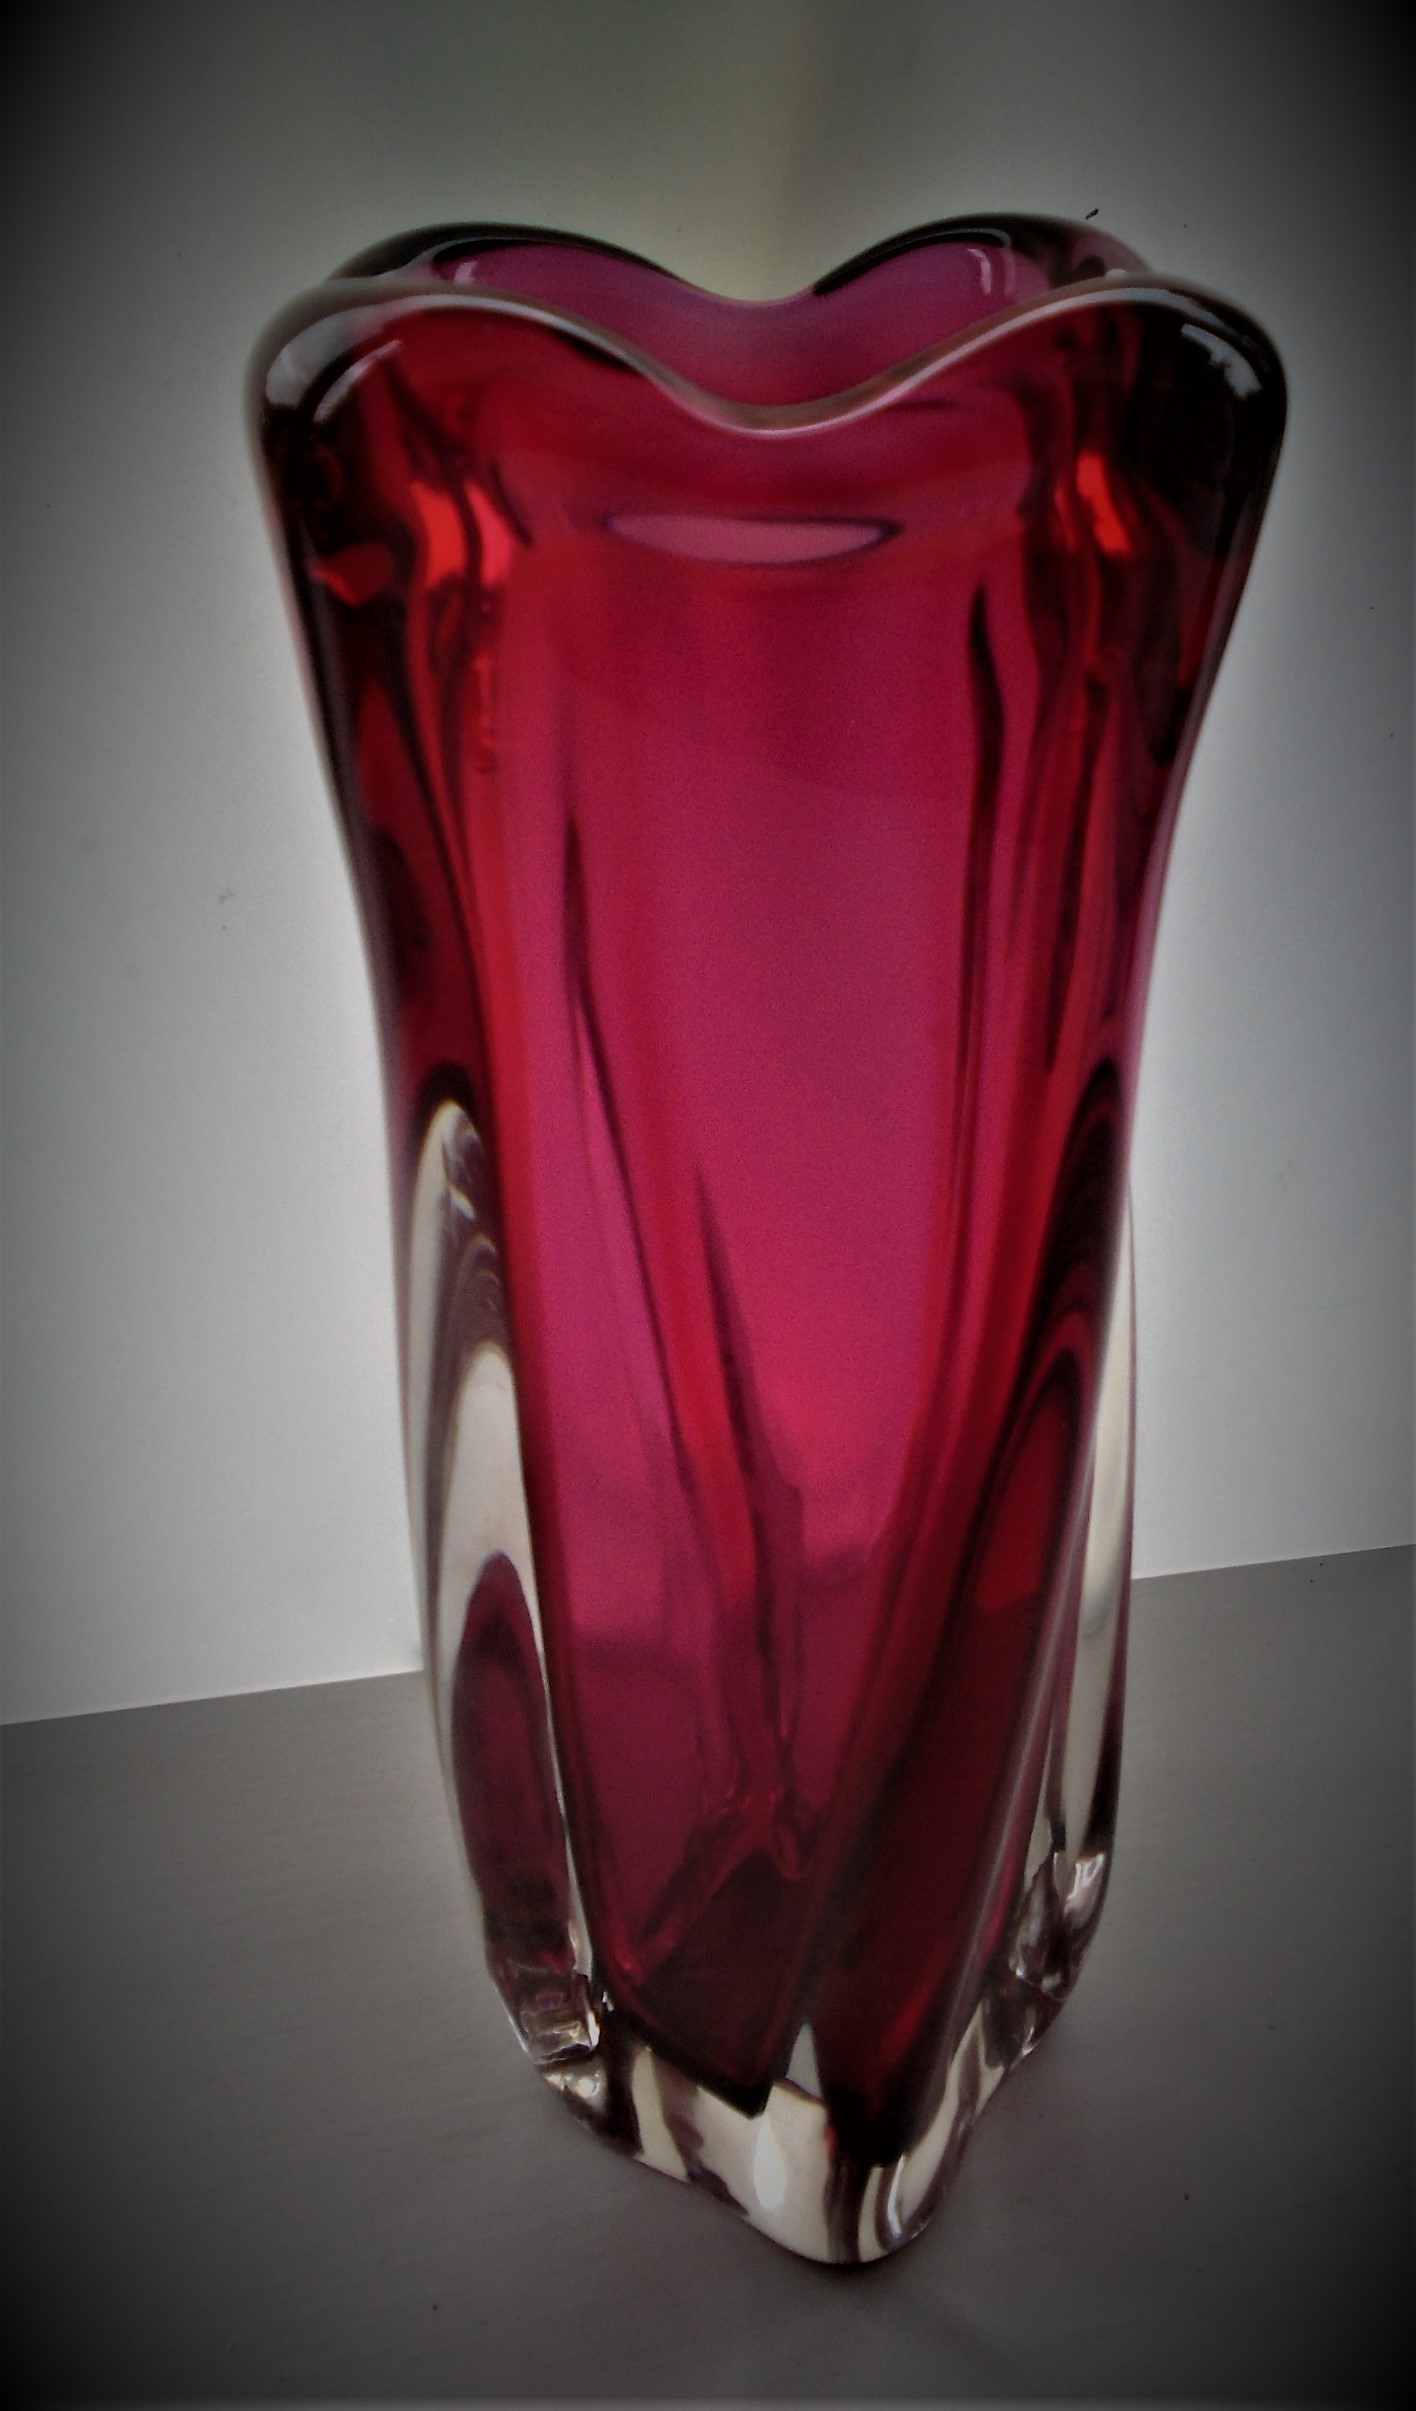 Stunning example of what I believe to be a VINTAGE CZECH GLASS VASE with a stylish twist within its body shape